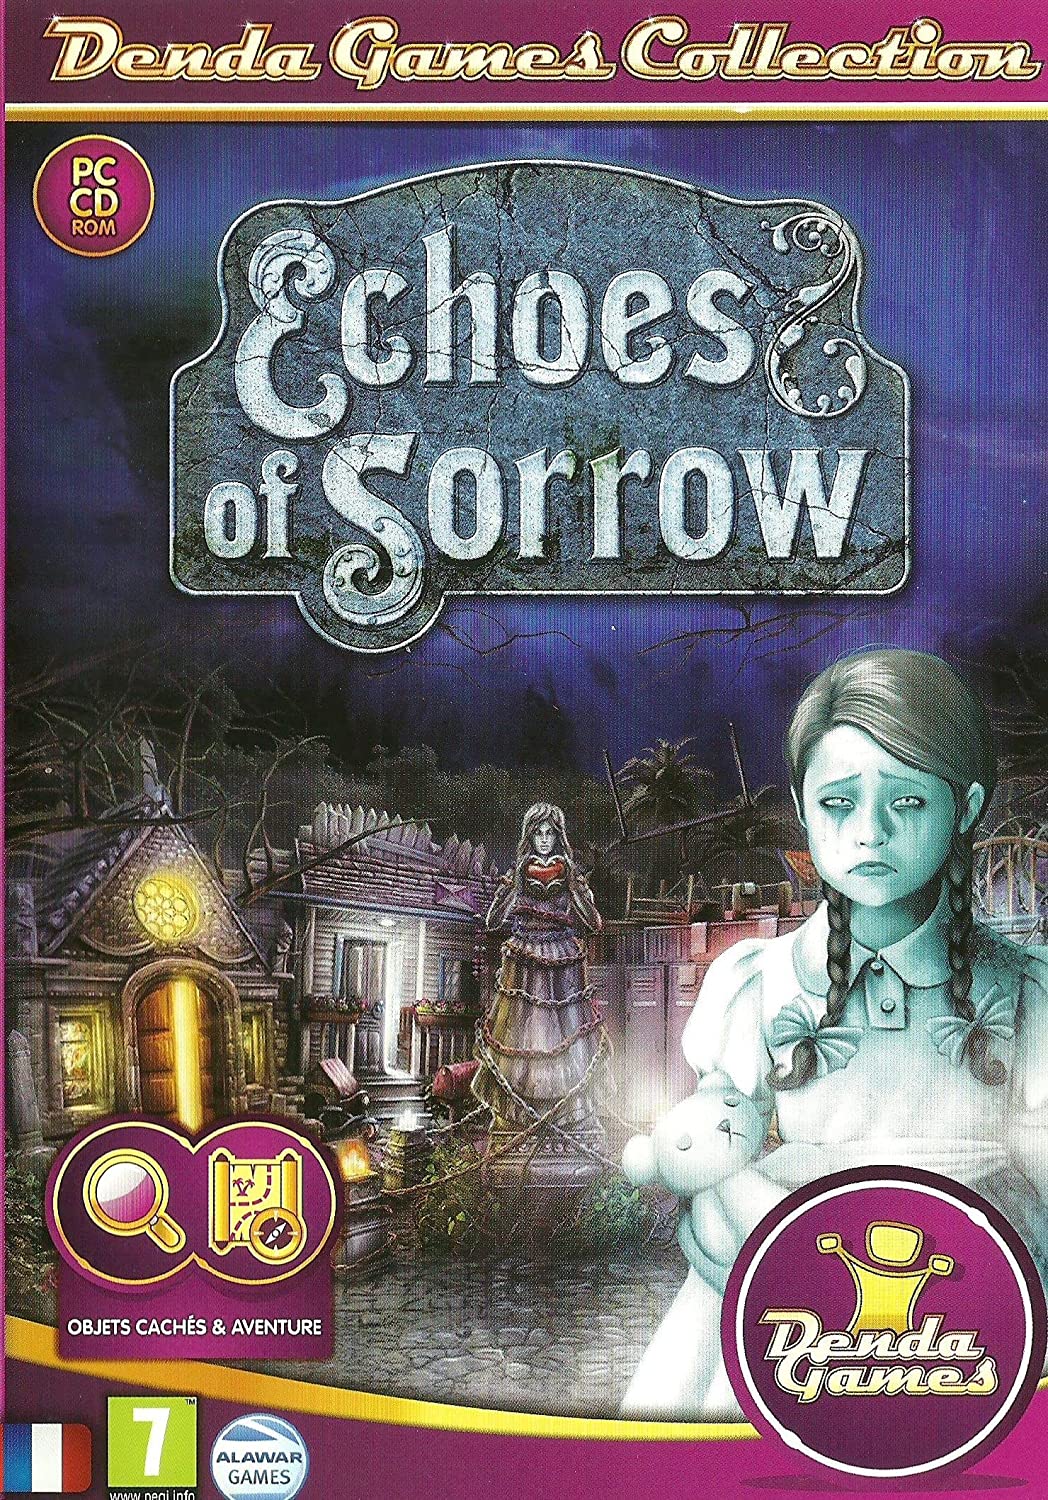 Echoes of sorrow